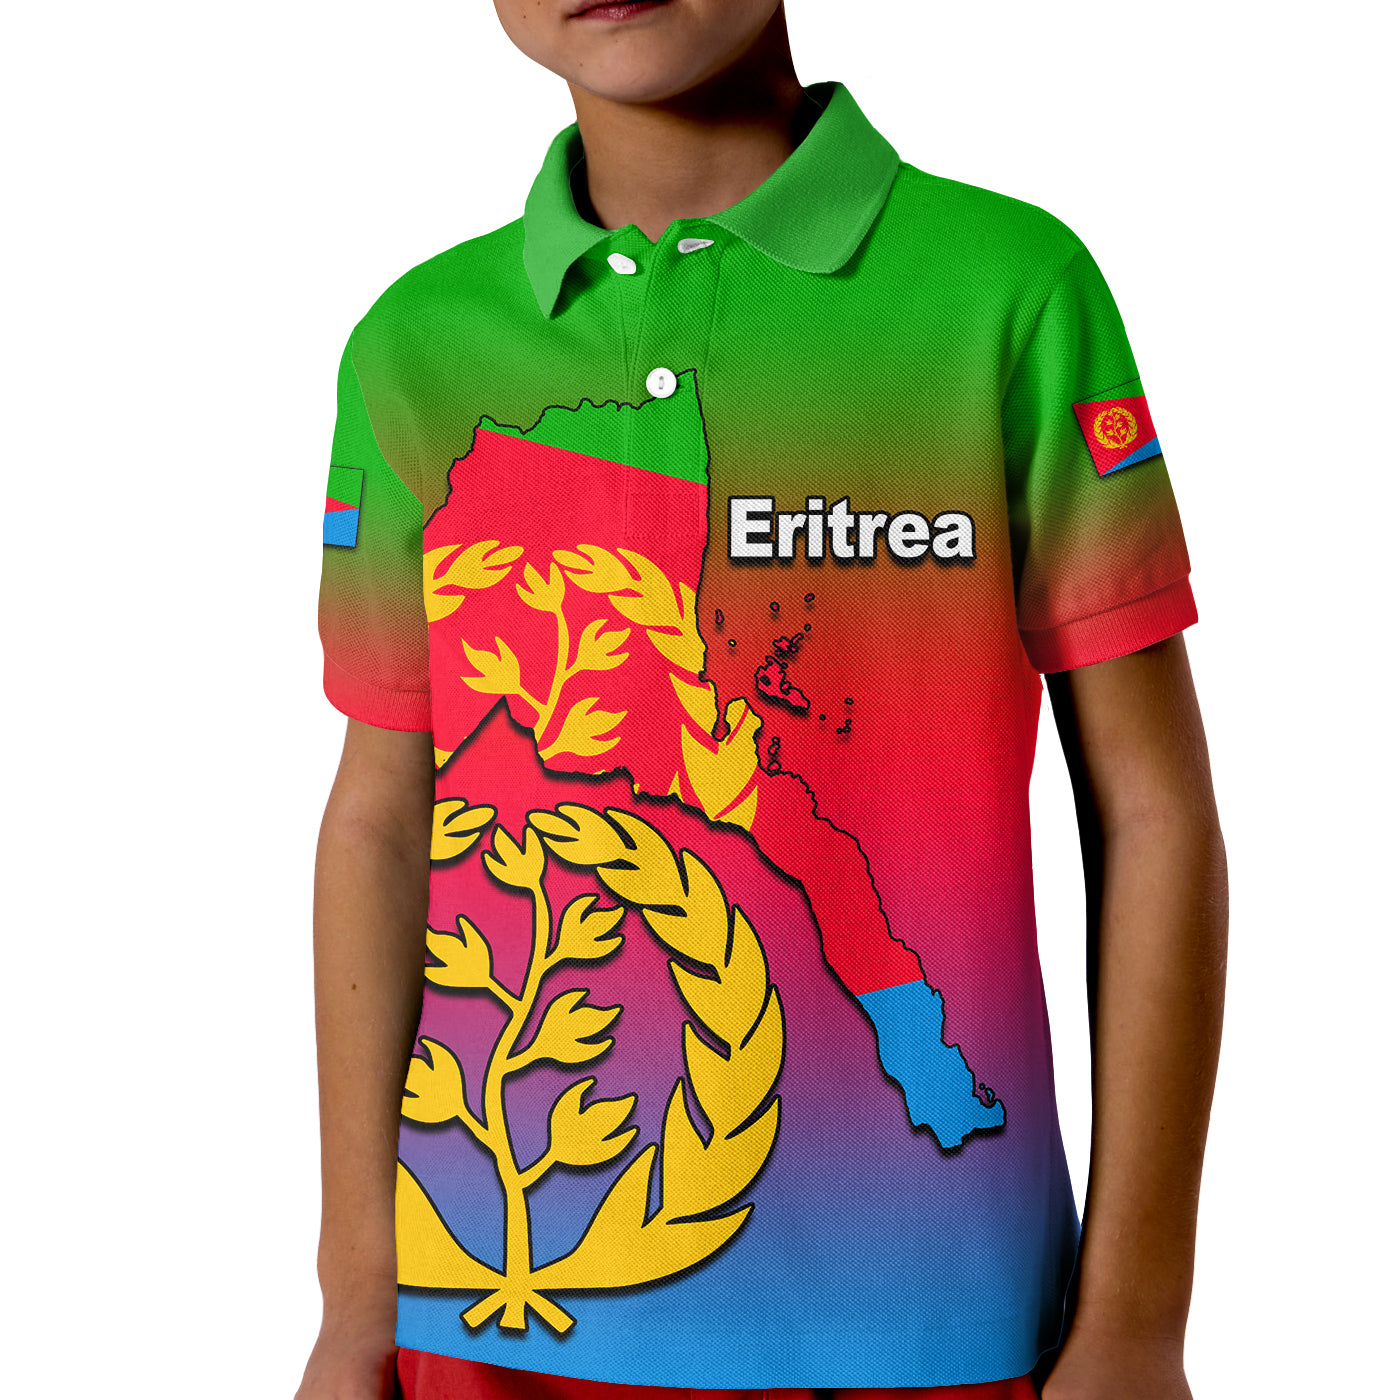 custom-personalised-eritrea-polo-shirt-kid-gradient-color-flag-with-map